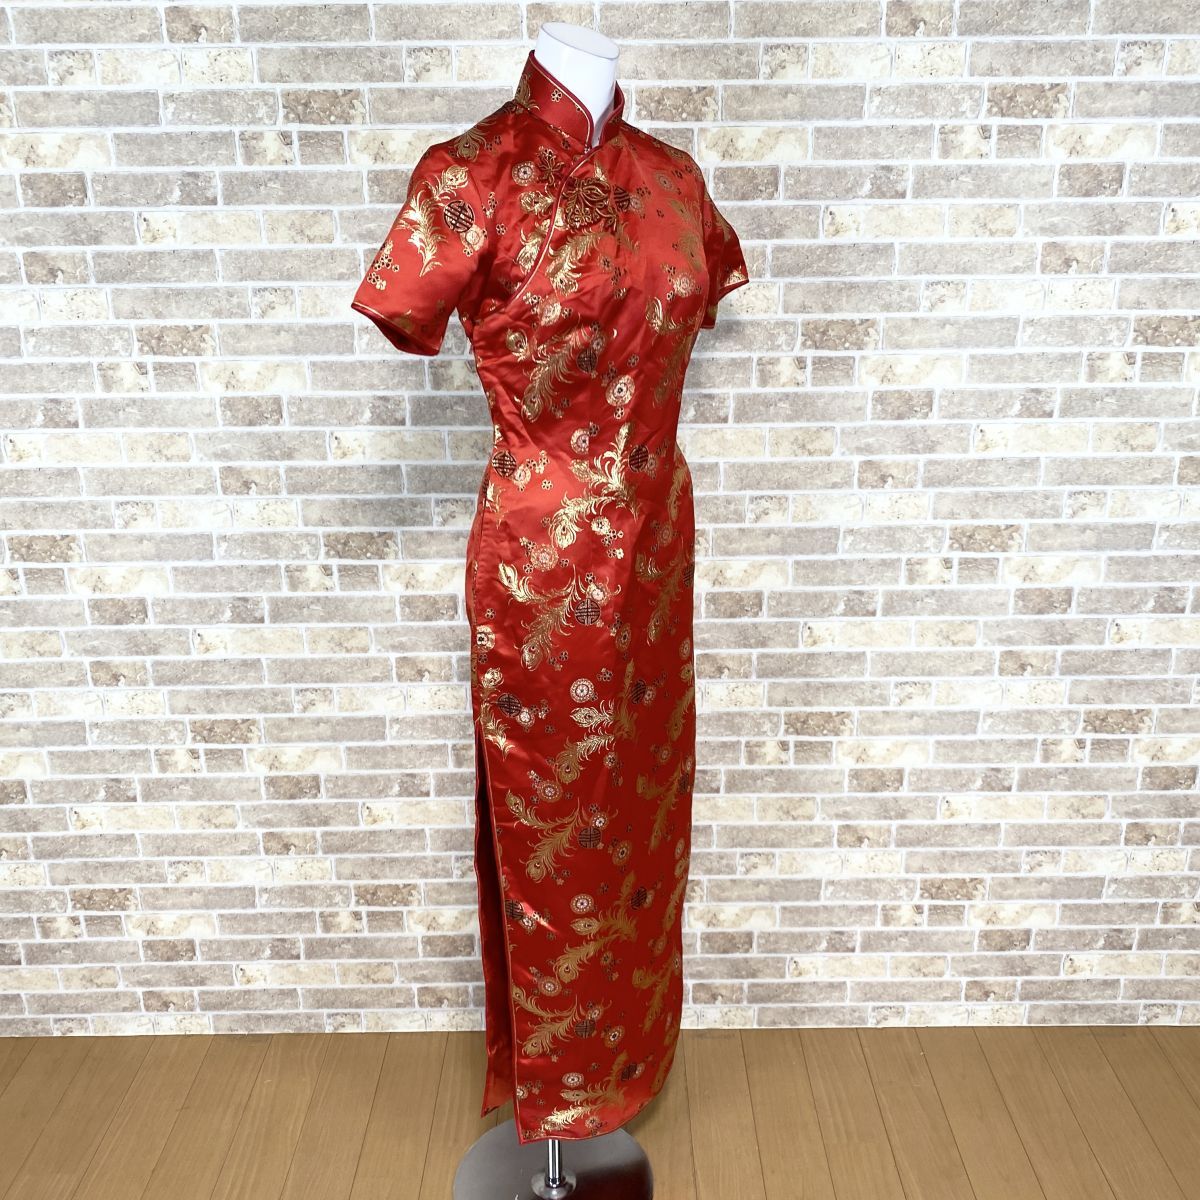 1 jpy China dress long One-piece red pattern color dress kyabadore presentation formal used 4796